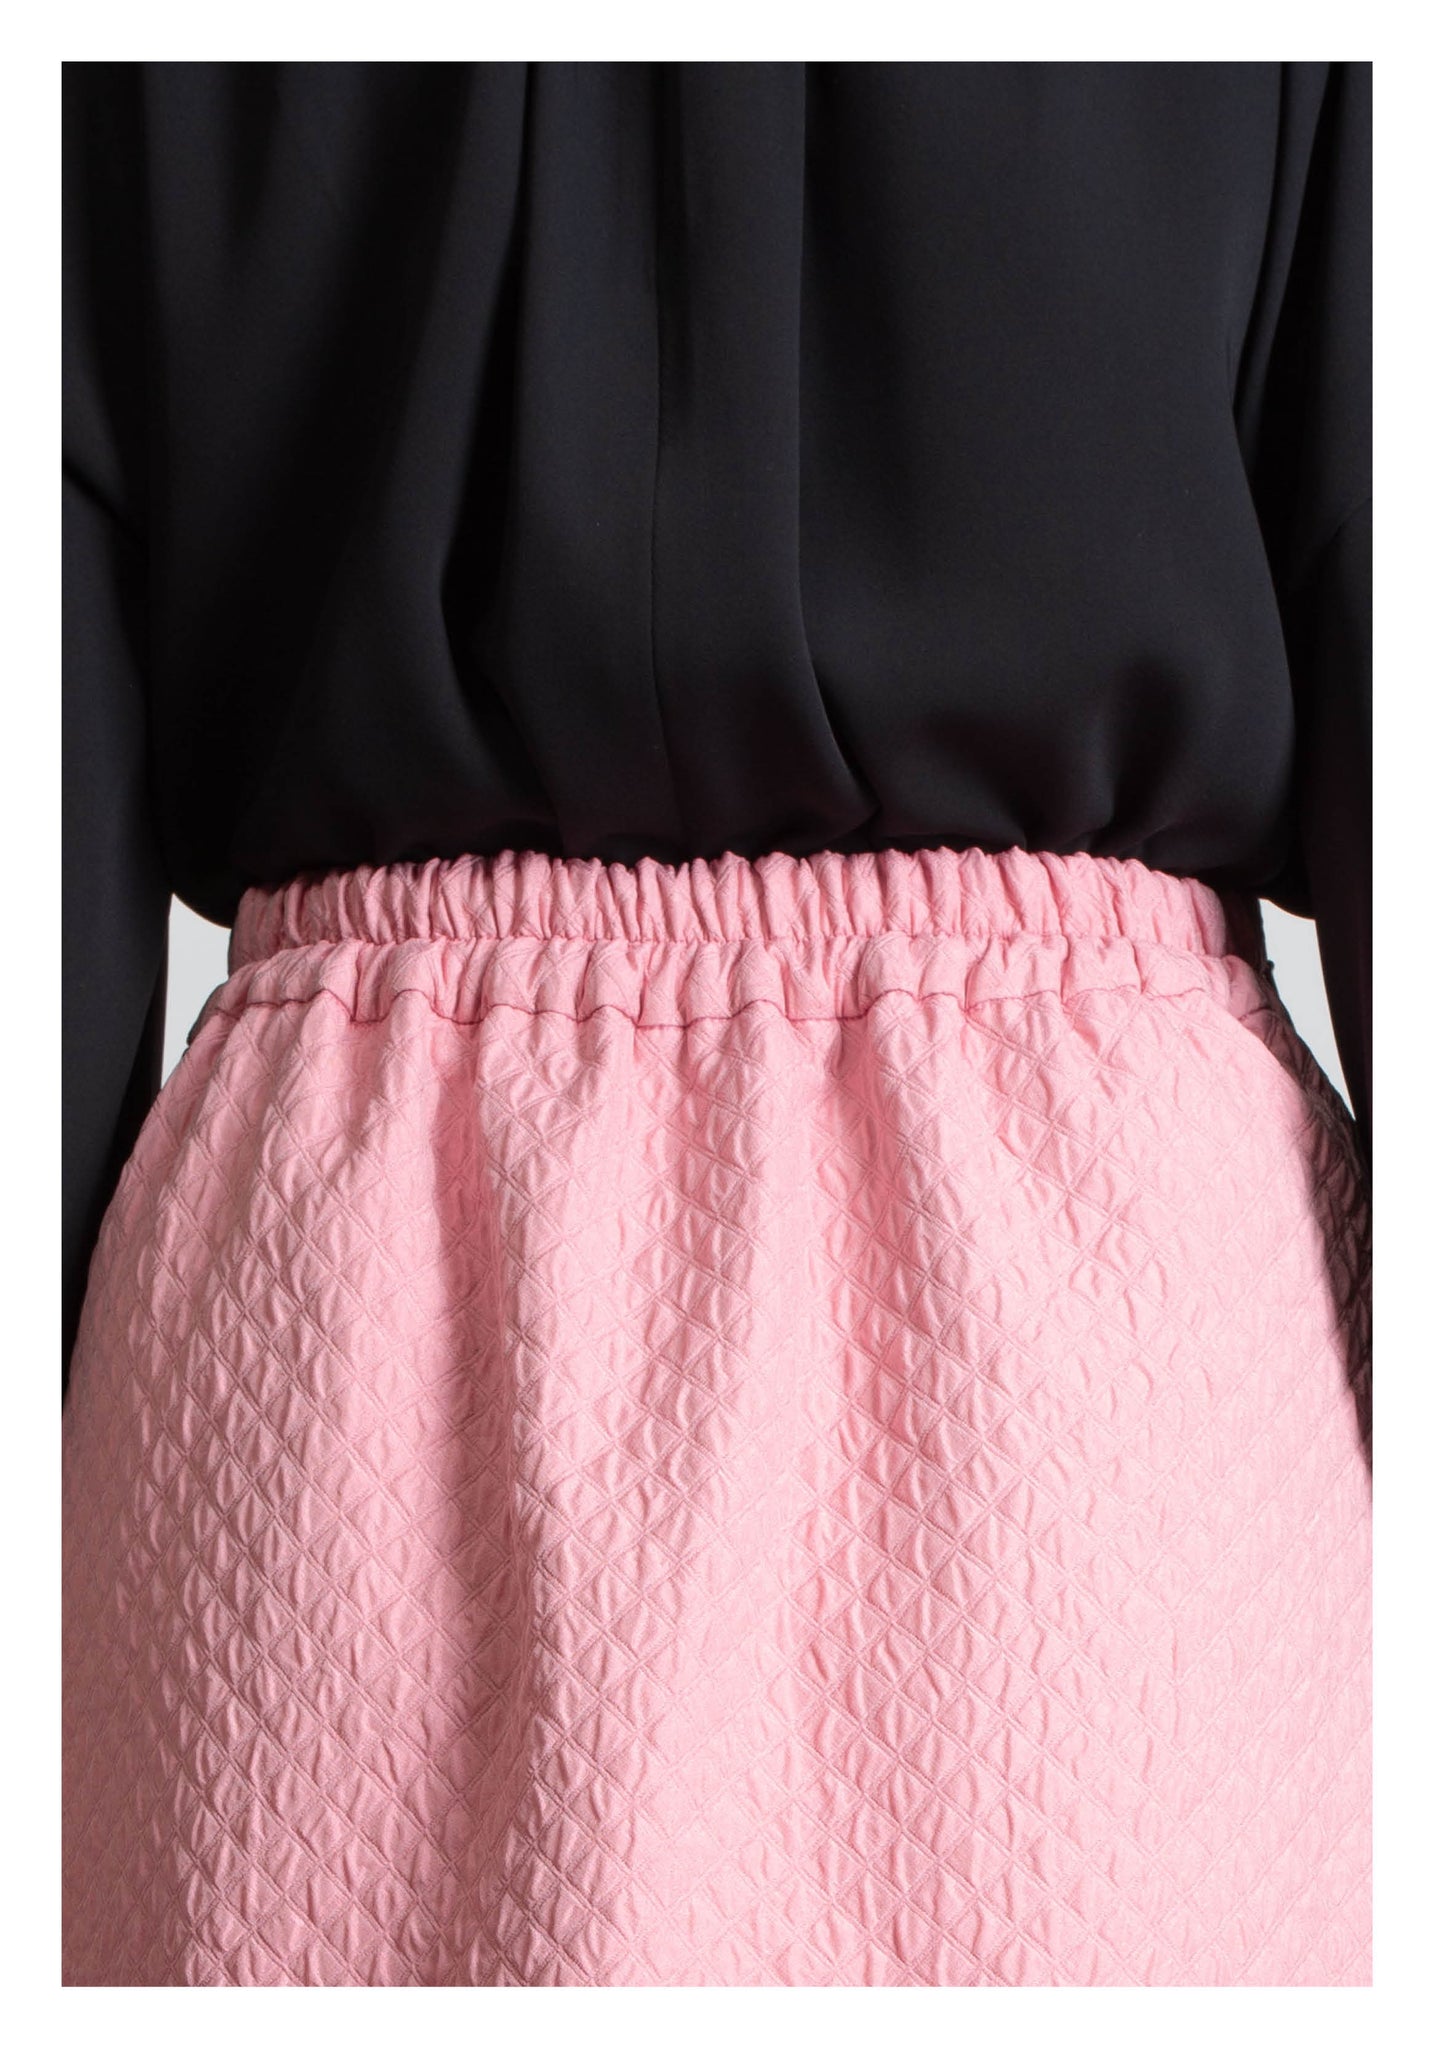 A Better Me Skirt Pink - whoami